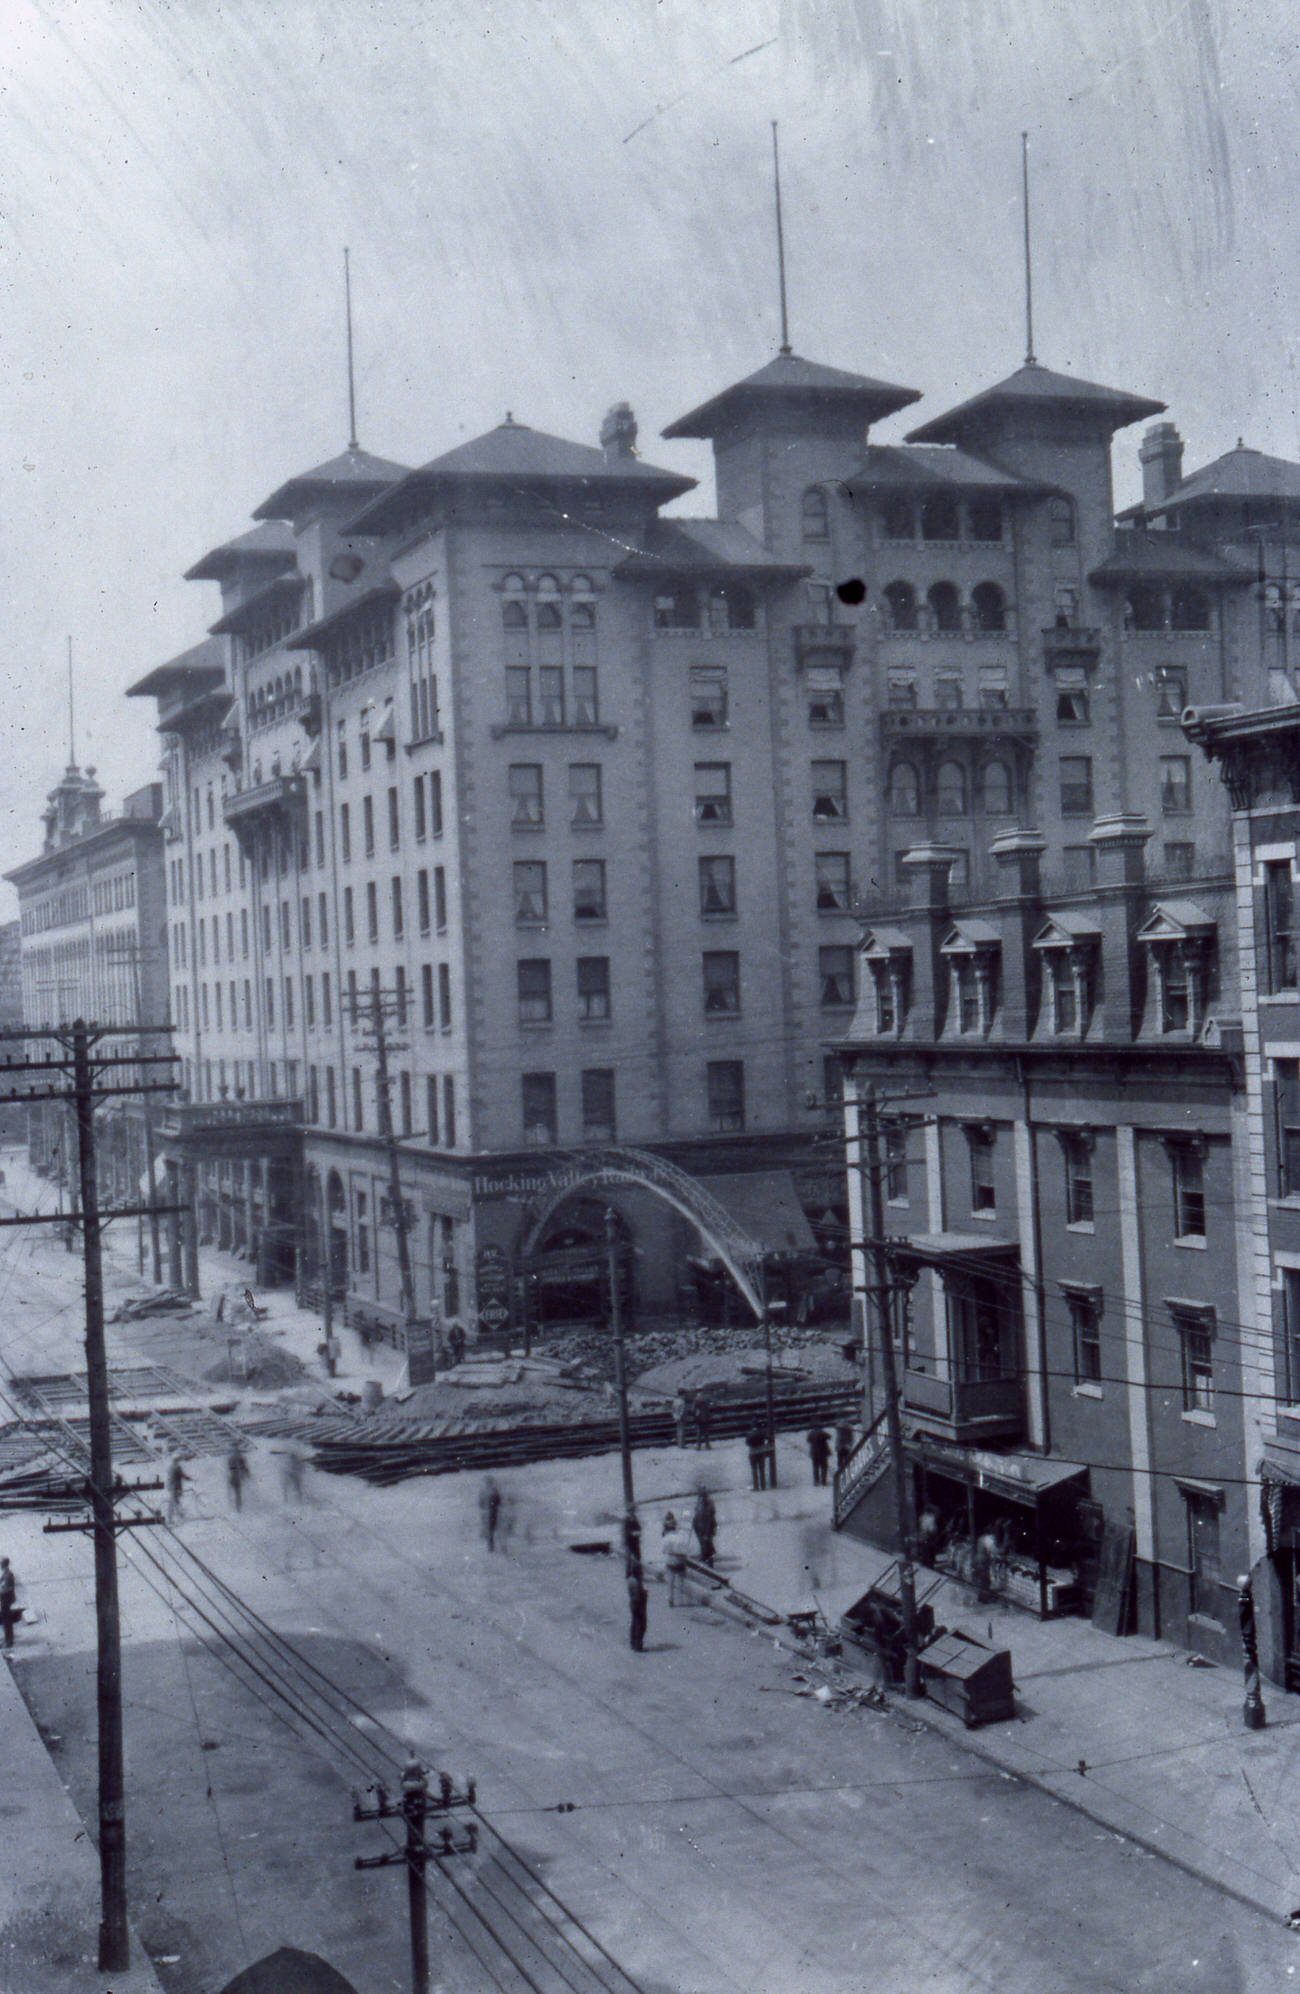 Third Chittenden Hotel during construction of streetcar lines along High and Spring Streets, circa 1895.